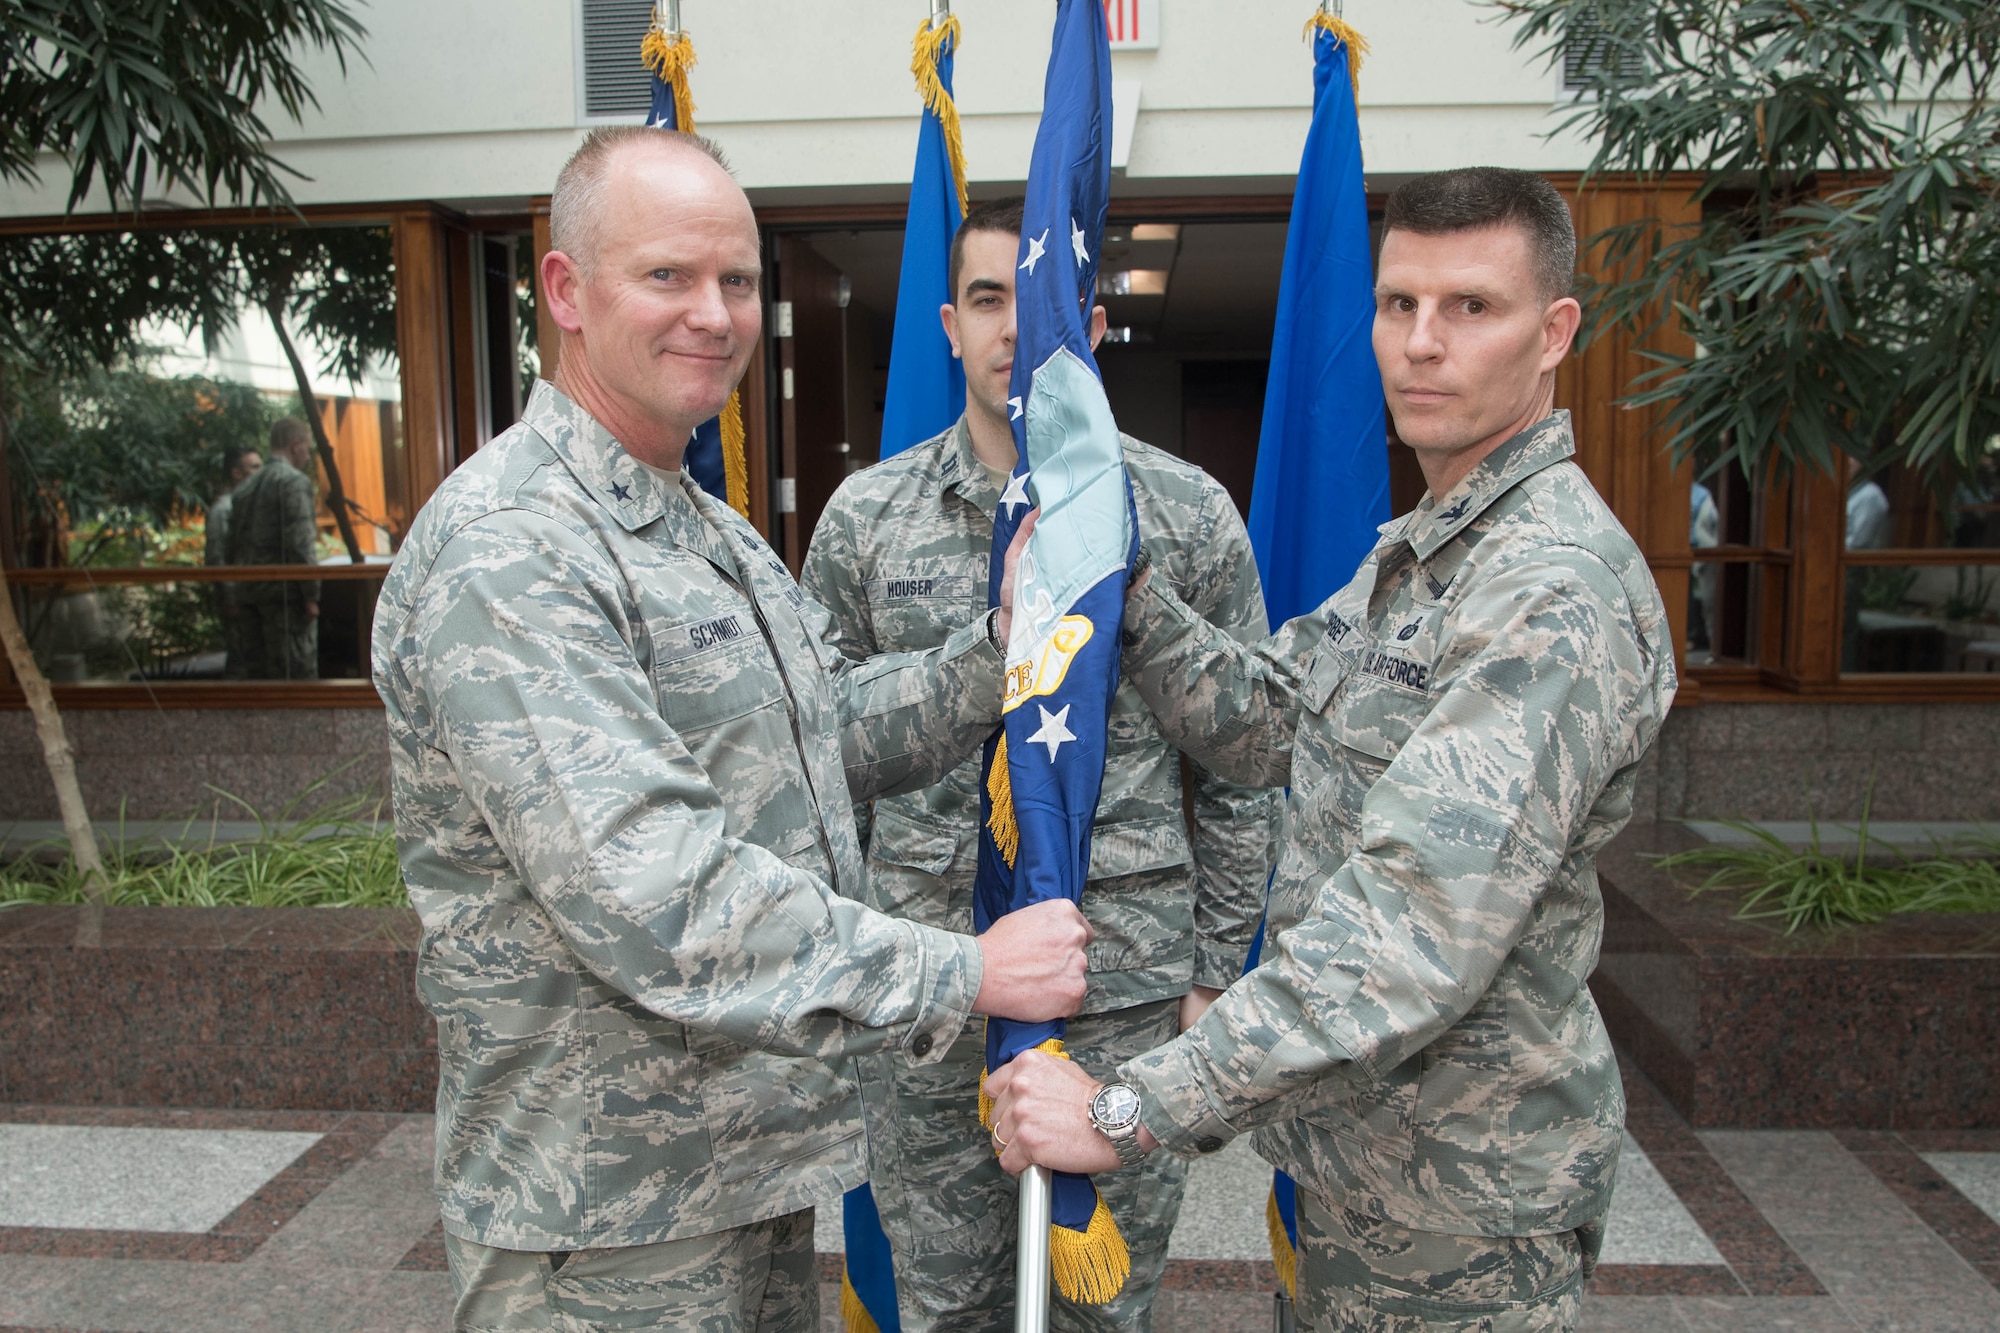 Brig. Gen. Michael Schmidt, left, Command, Control, Communications, Intelligence and Networks program executive officer, passes a guidon symbolizing Col. Jonathan Sorbet's assumption of leadership as the senior material leader for the Family of Advanced Beyond Line-of-Sight Terminals division within C3I&N August 8, at the MITRE Corp. in Bedford, Mass. (U.S. Air Force photo by Jerry Saslav)